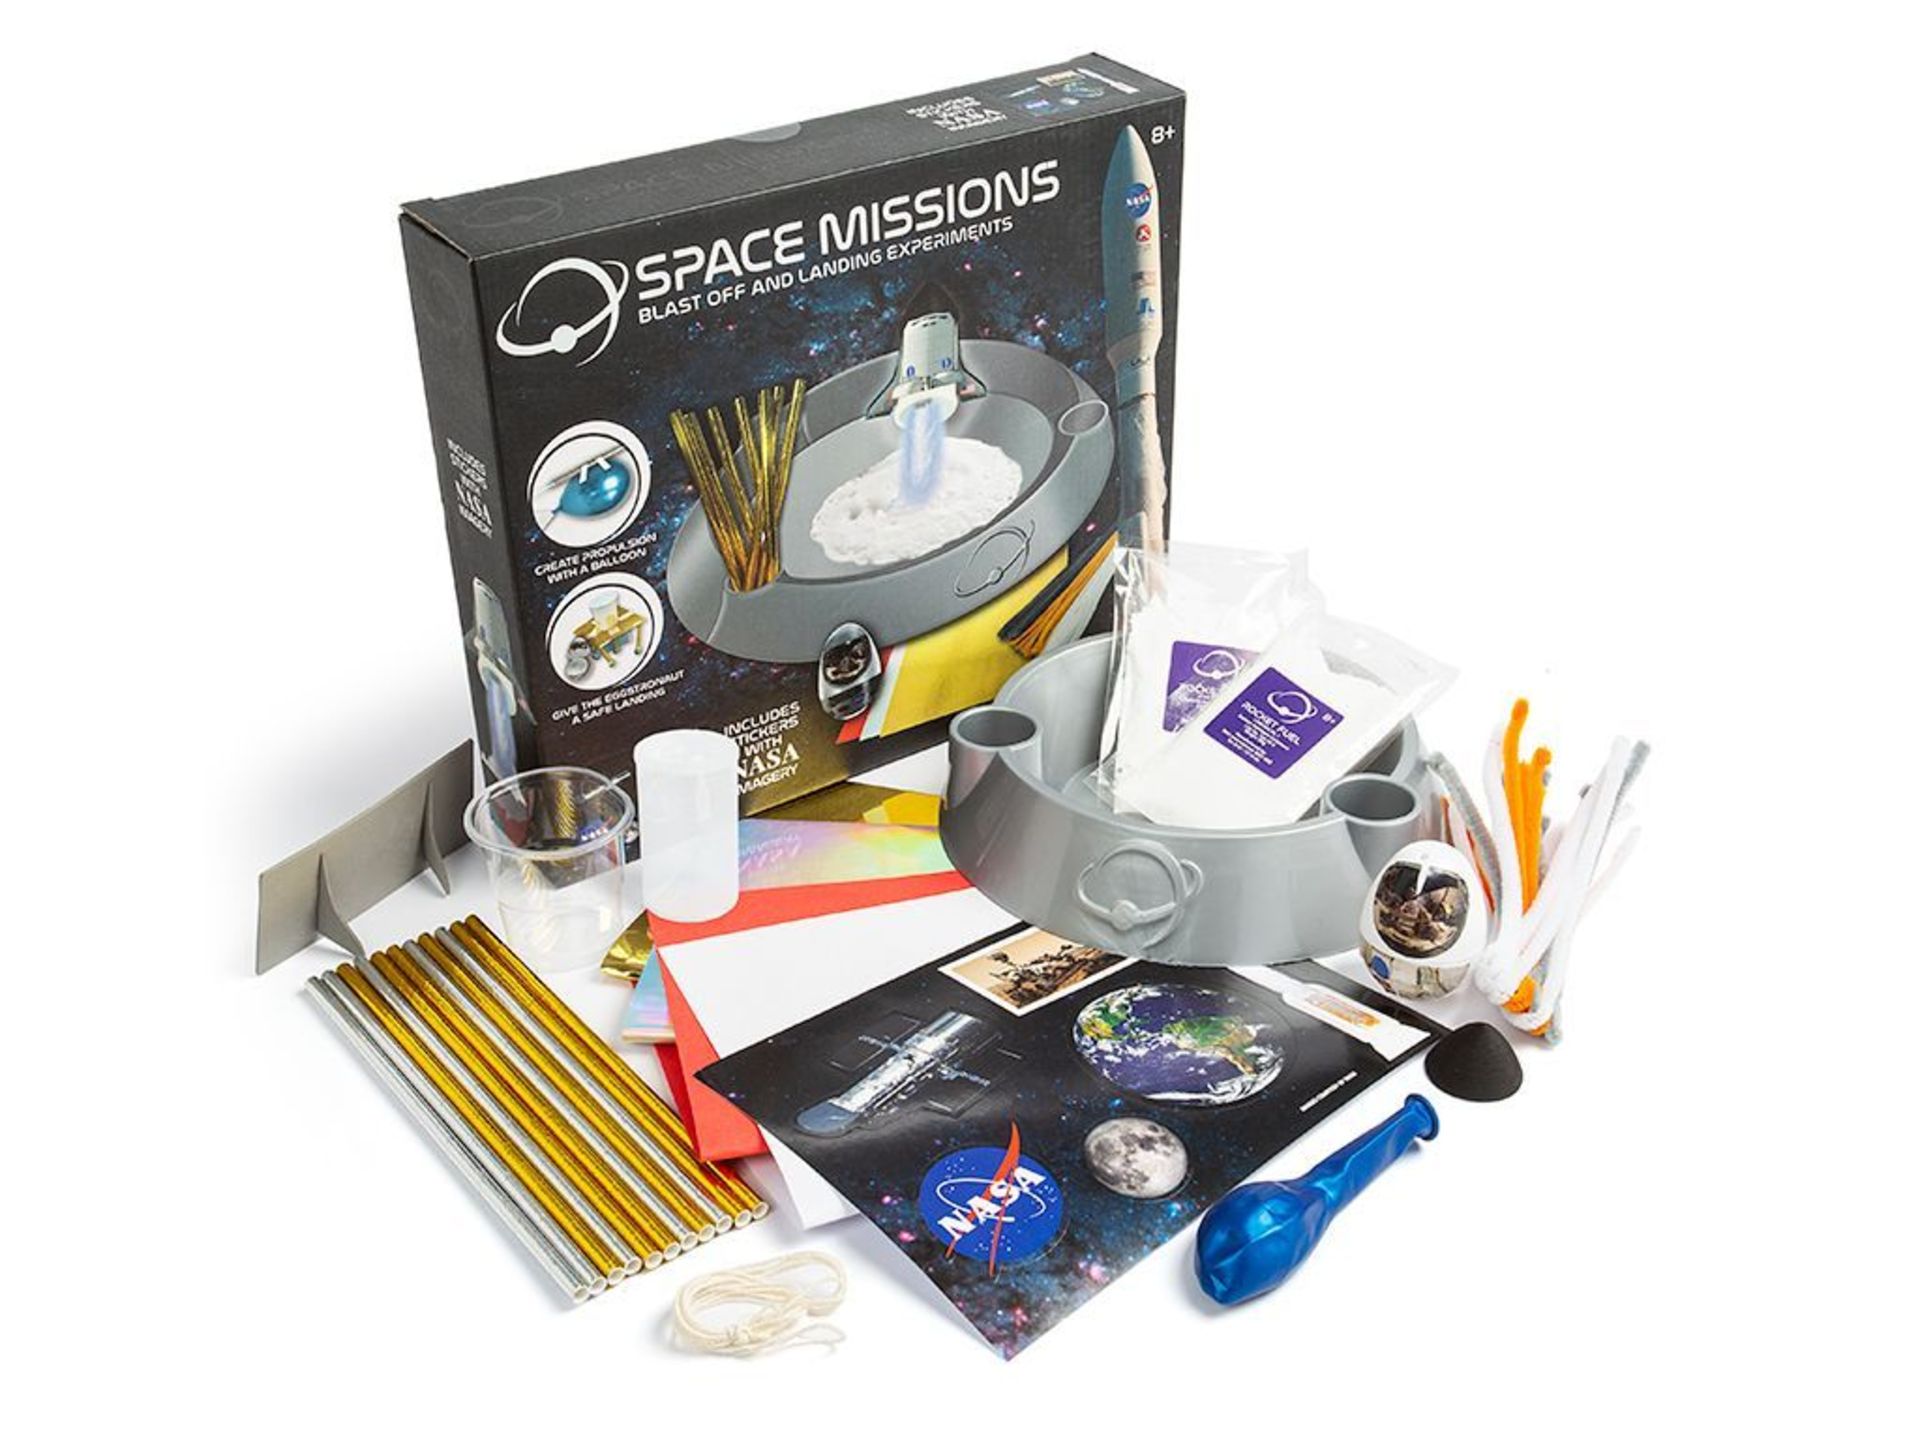 NASA SPACE MISSIONS BLAST OFF & LANDING EXPERIMENTS INCLUDES STICKERS WITH NASA IMAGERY